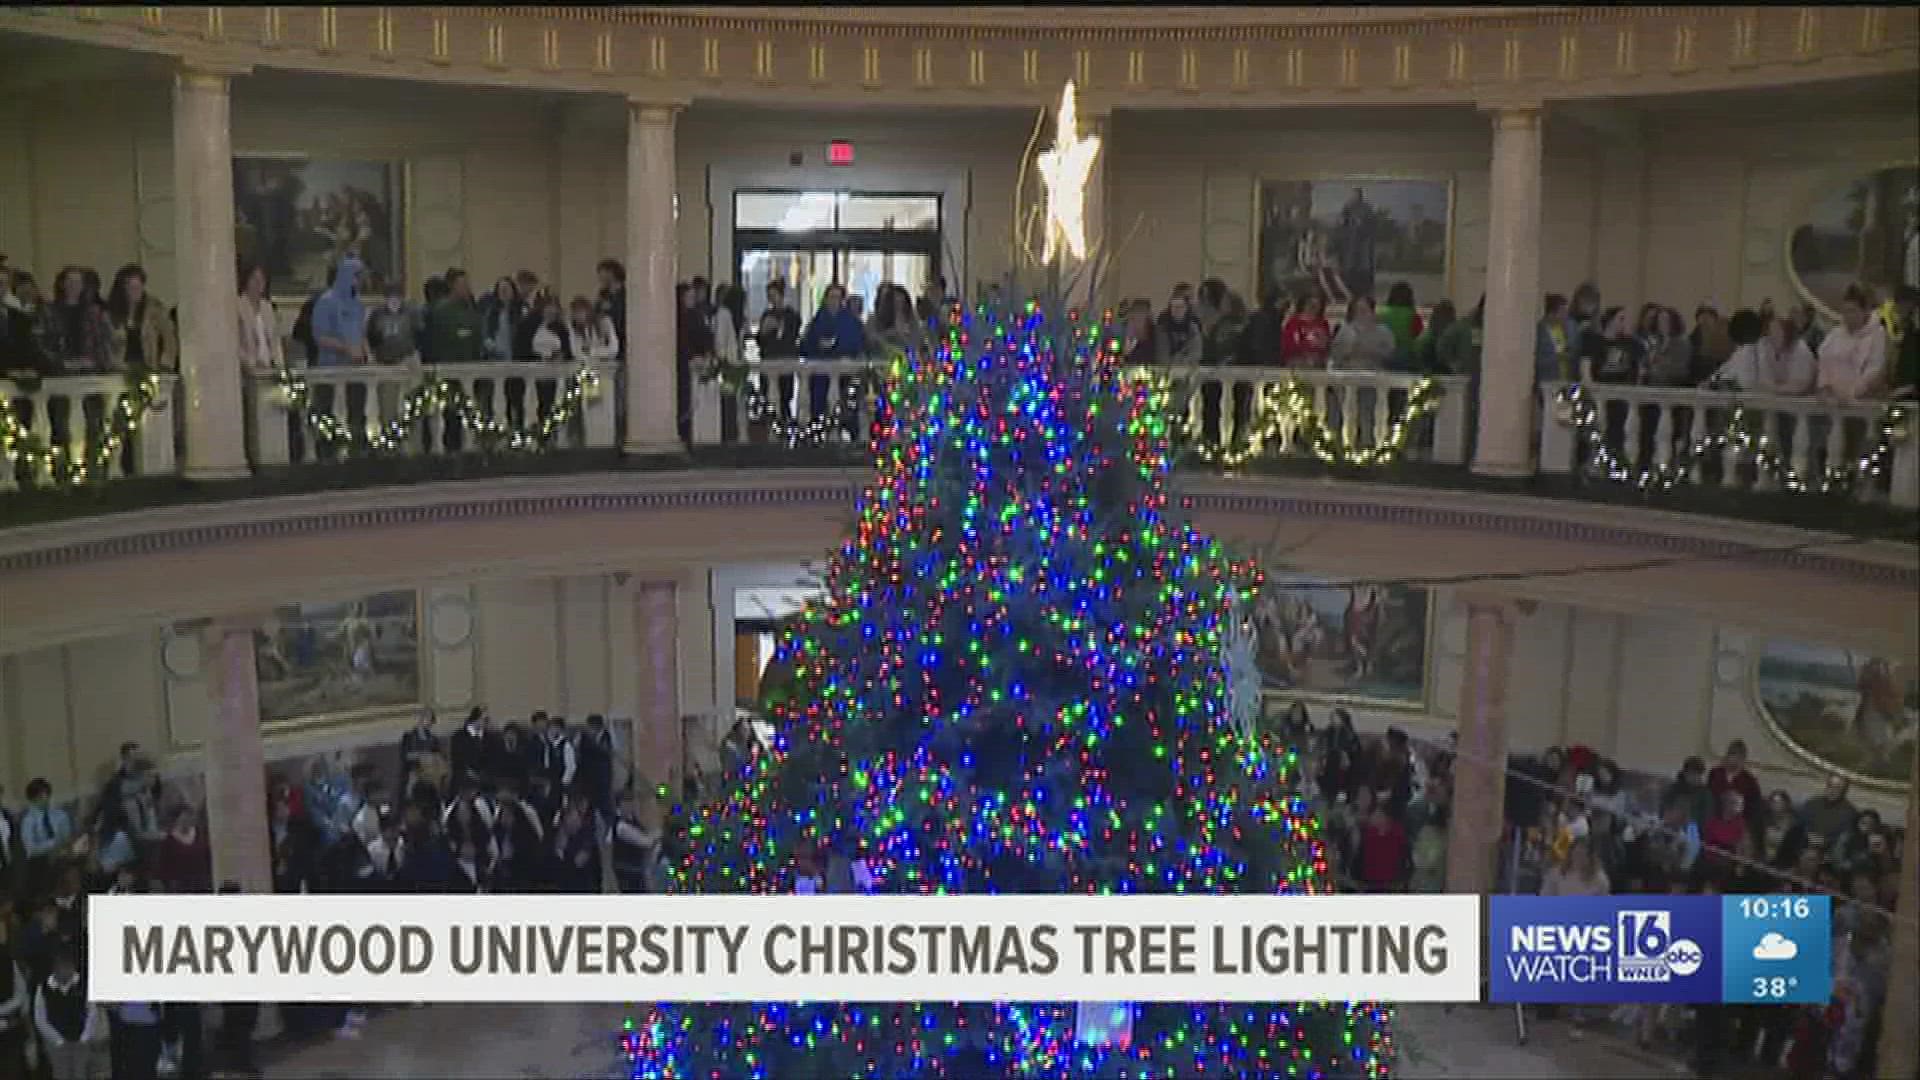 The tree is open to the public during regular business hours at Marywood University.